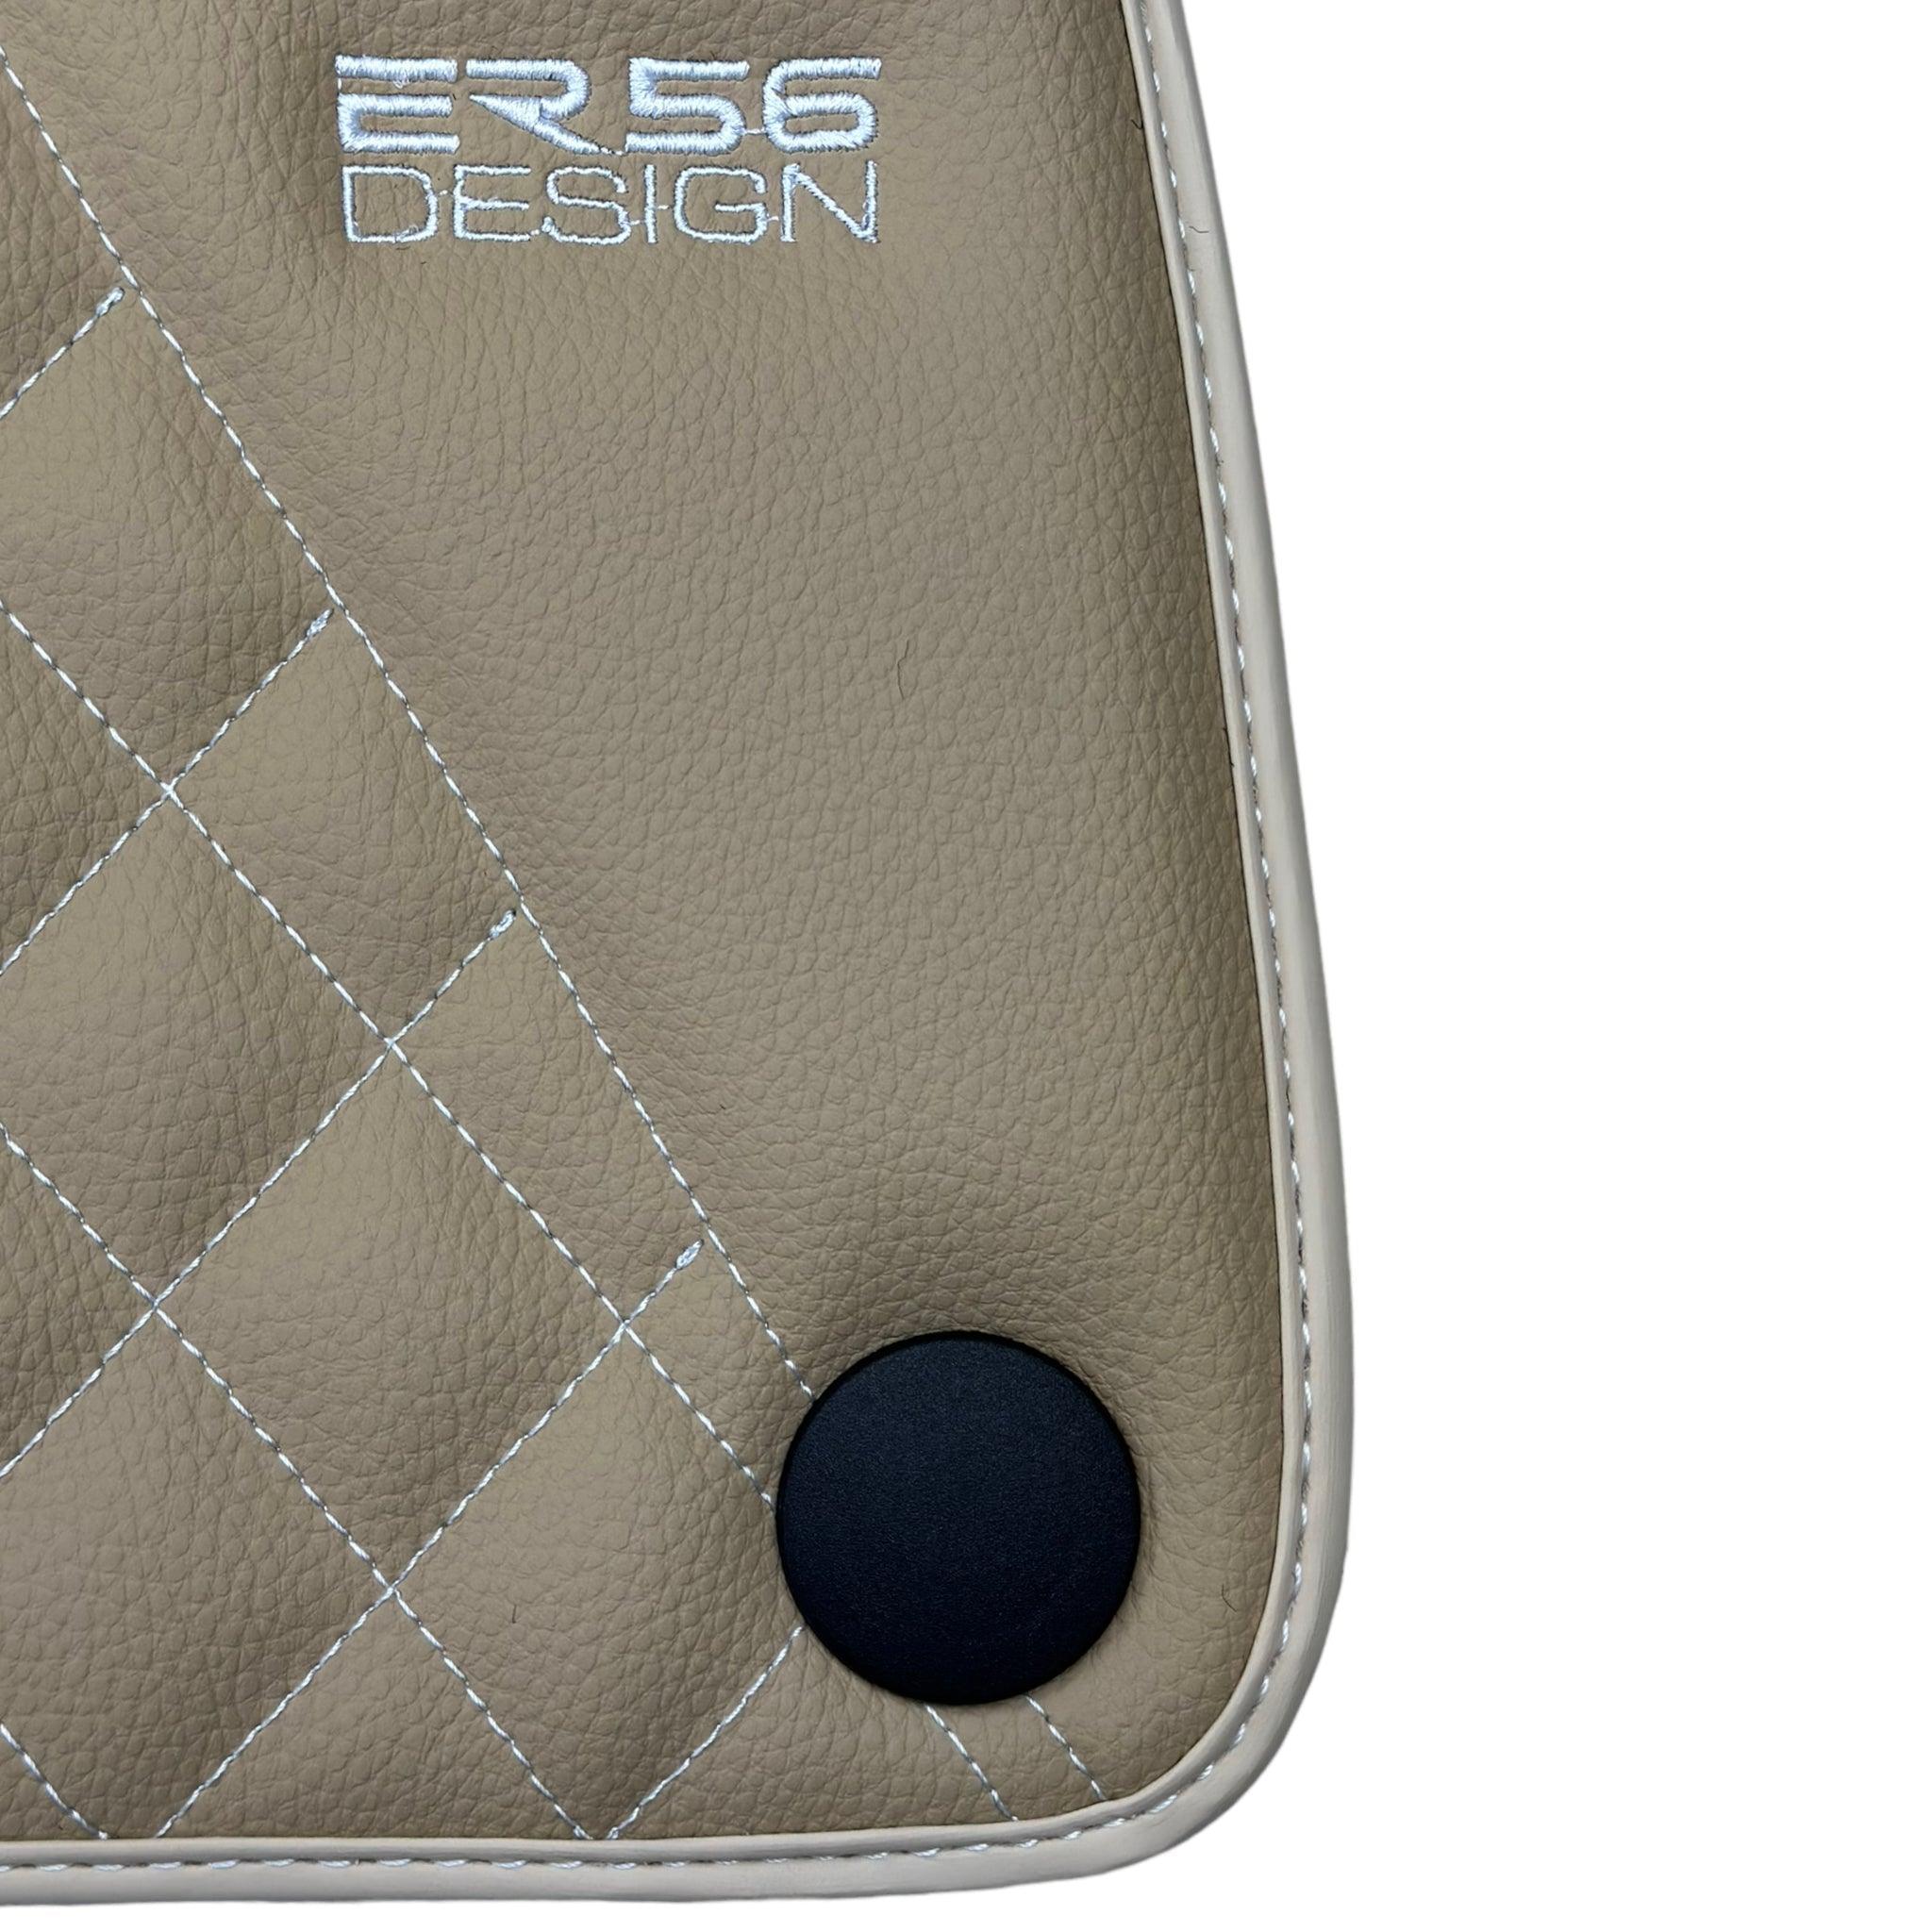 Beige Leather Floor Mats For Mercedes Benz C-Class C205 Coupe (2015-2018)